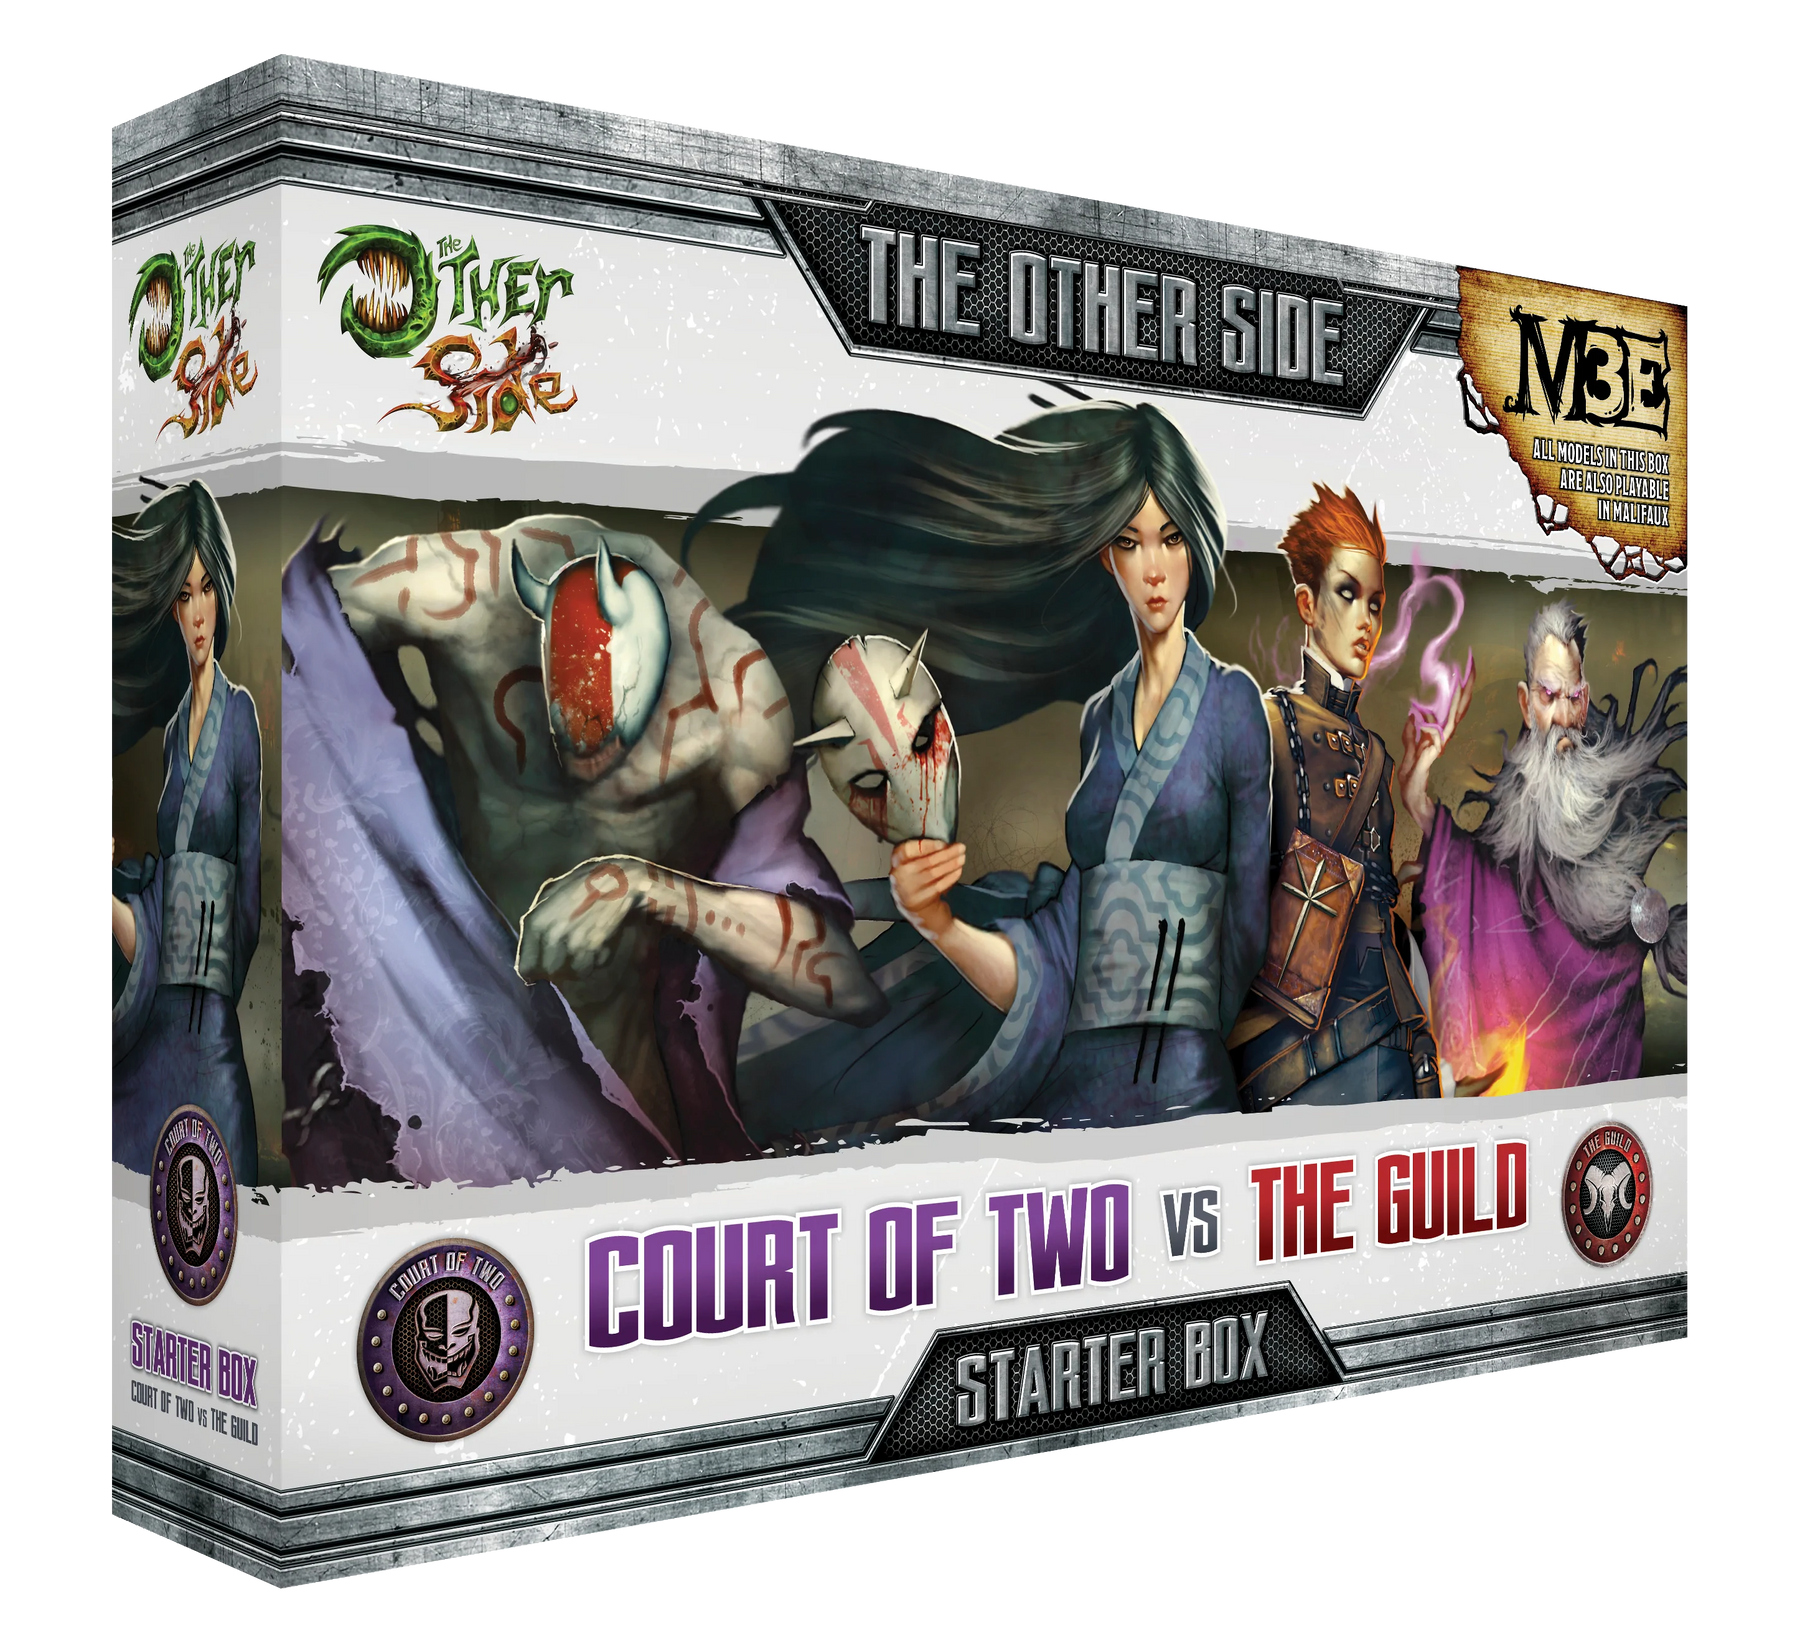 Malifaux 3rd Edition: The Other Side Starter Box: The Guild vs Court of Two